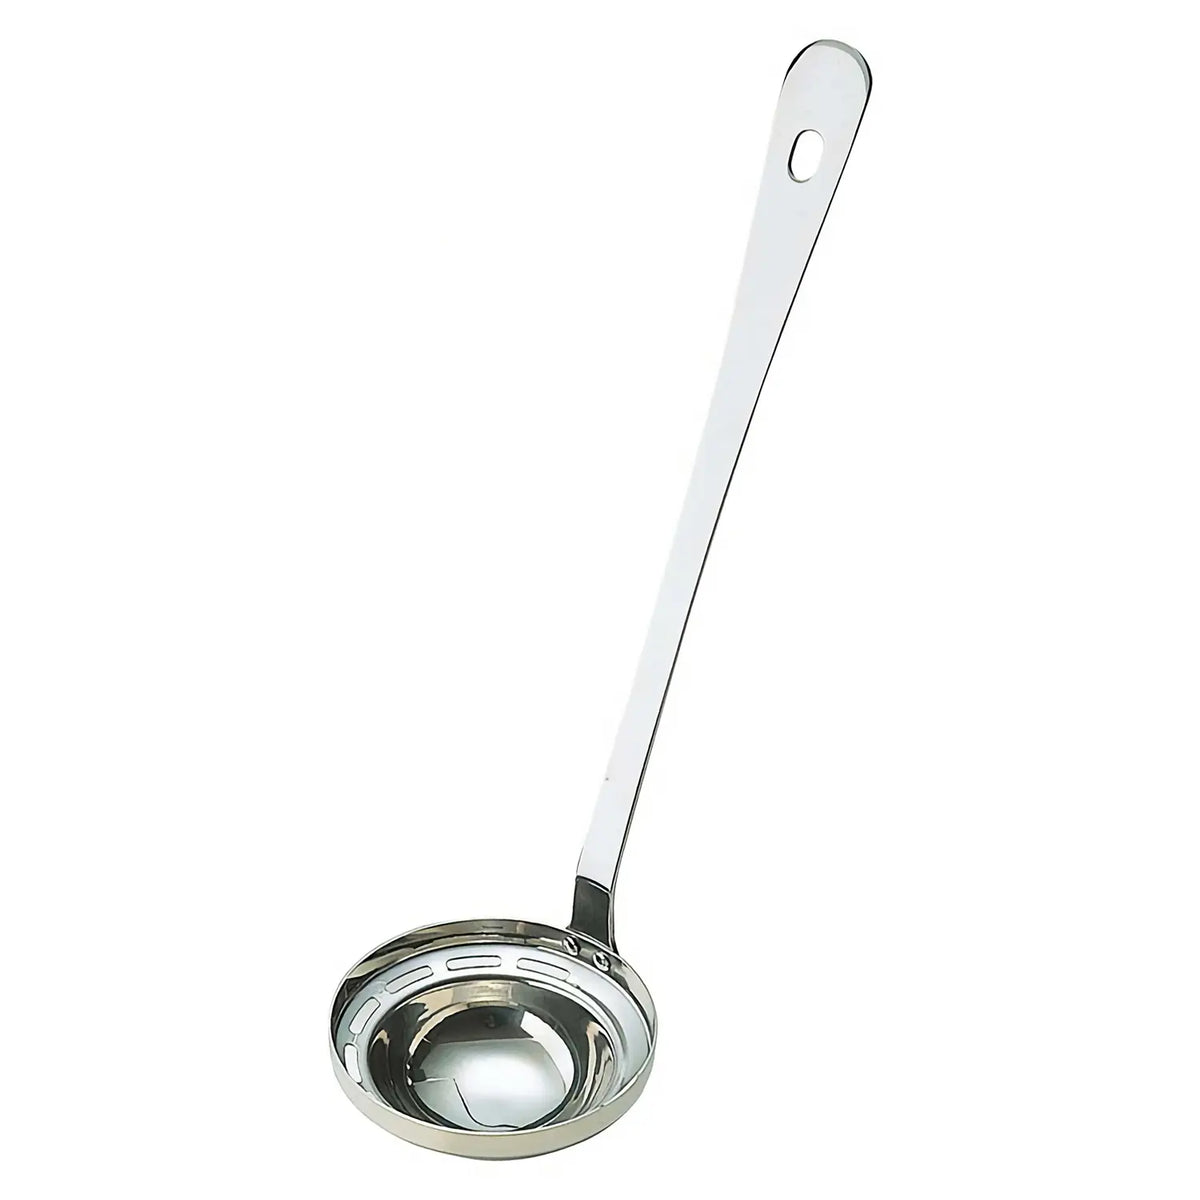 TIGERCROWN Stainless Steel Ladle with Scale